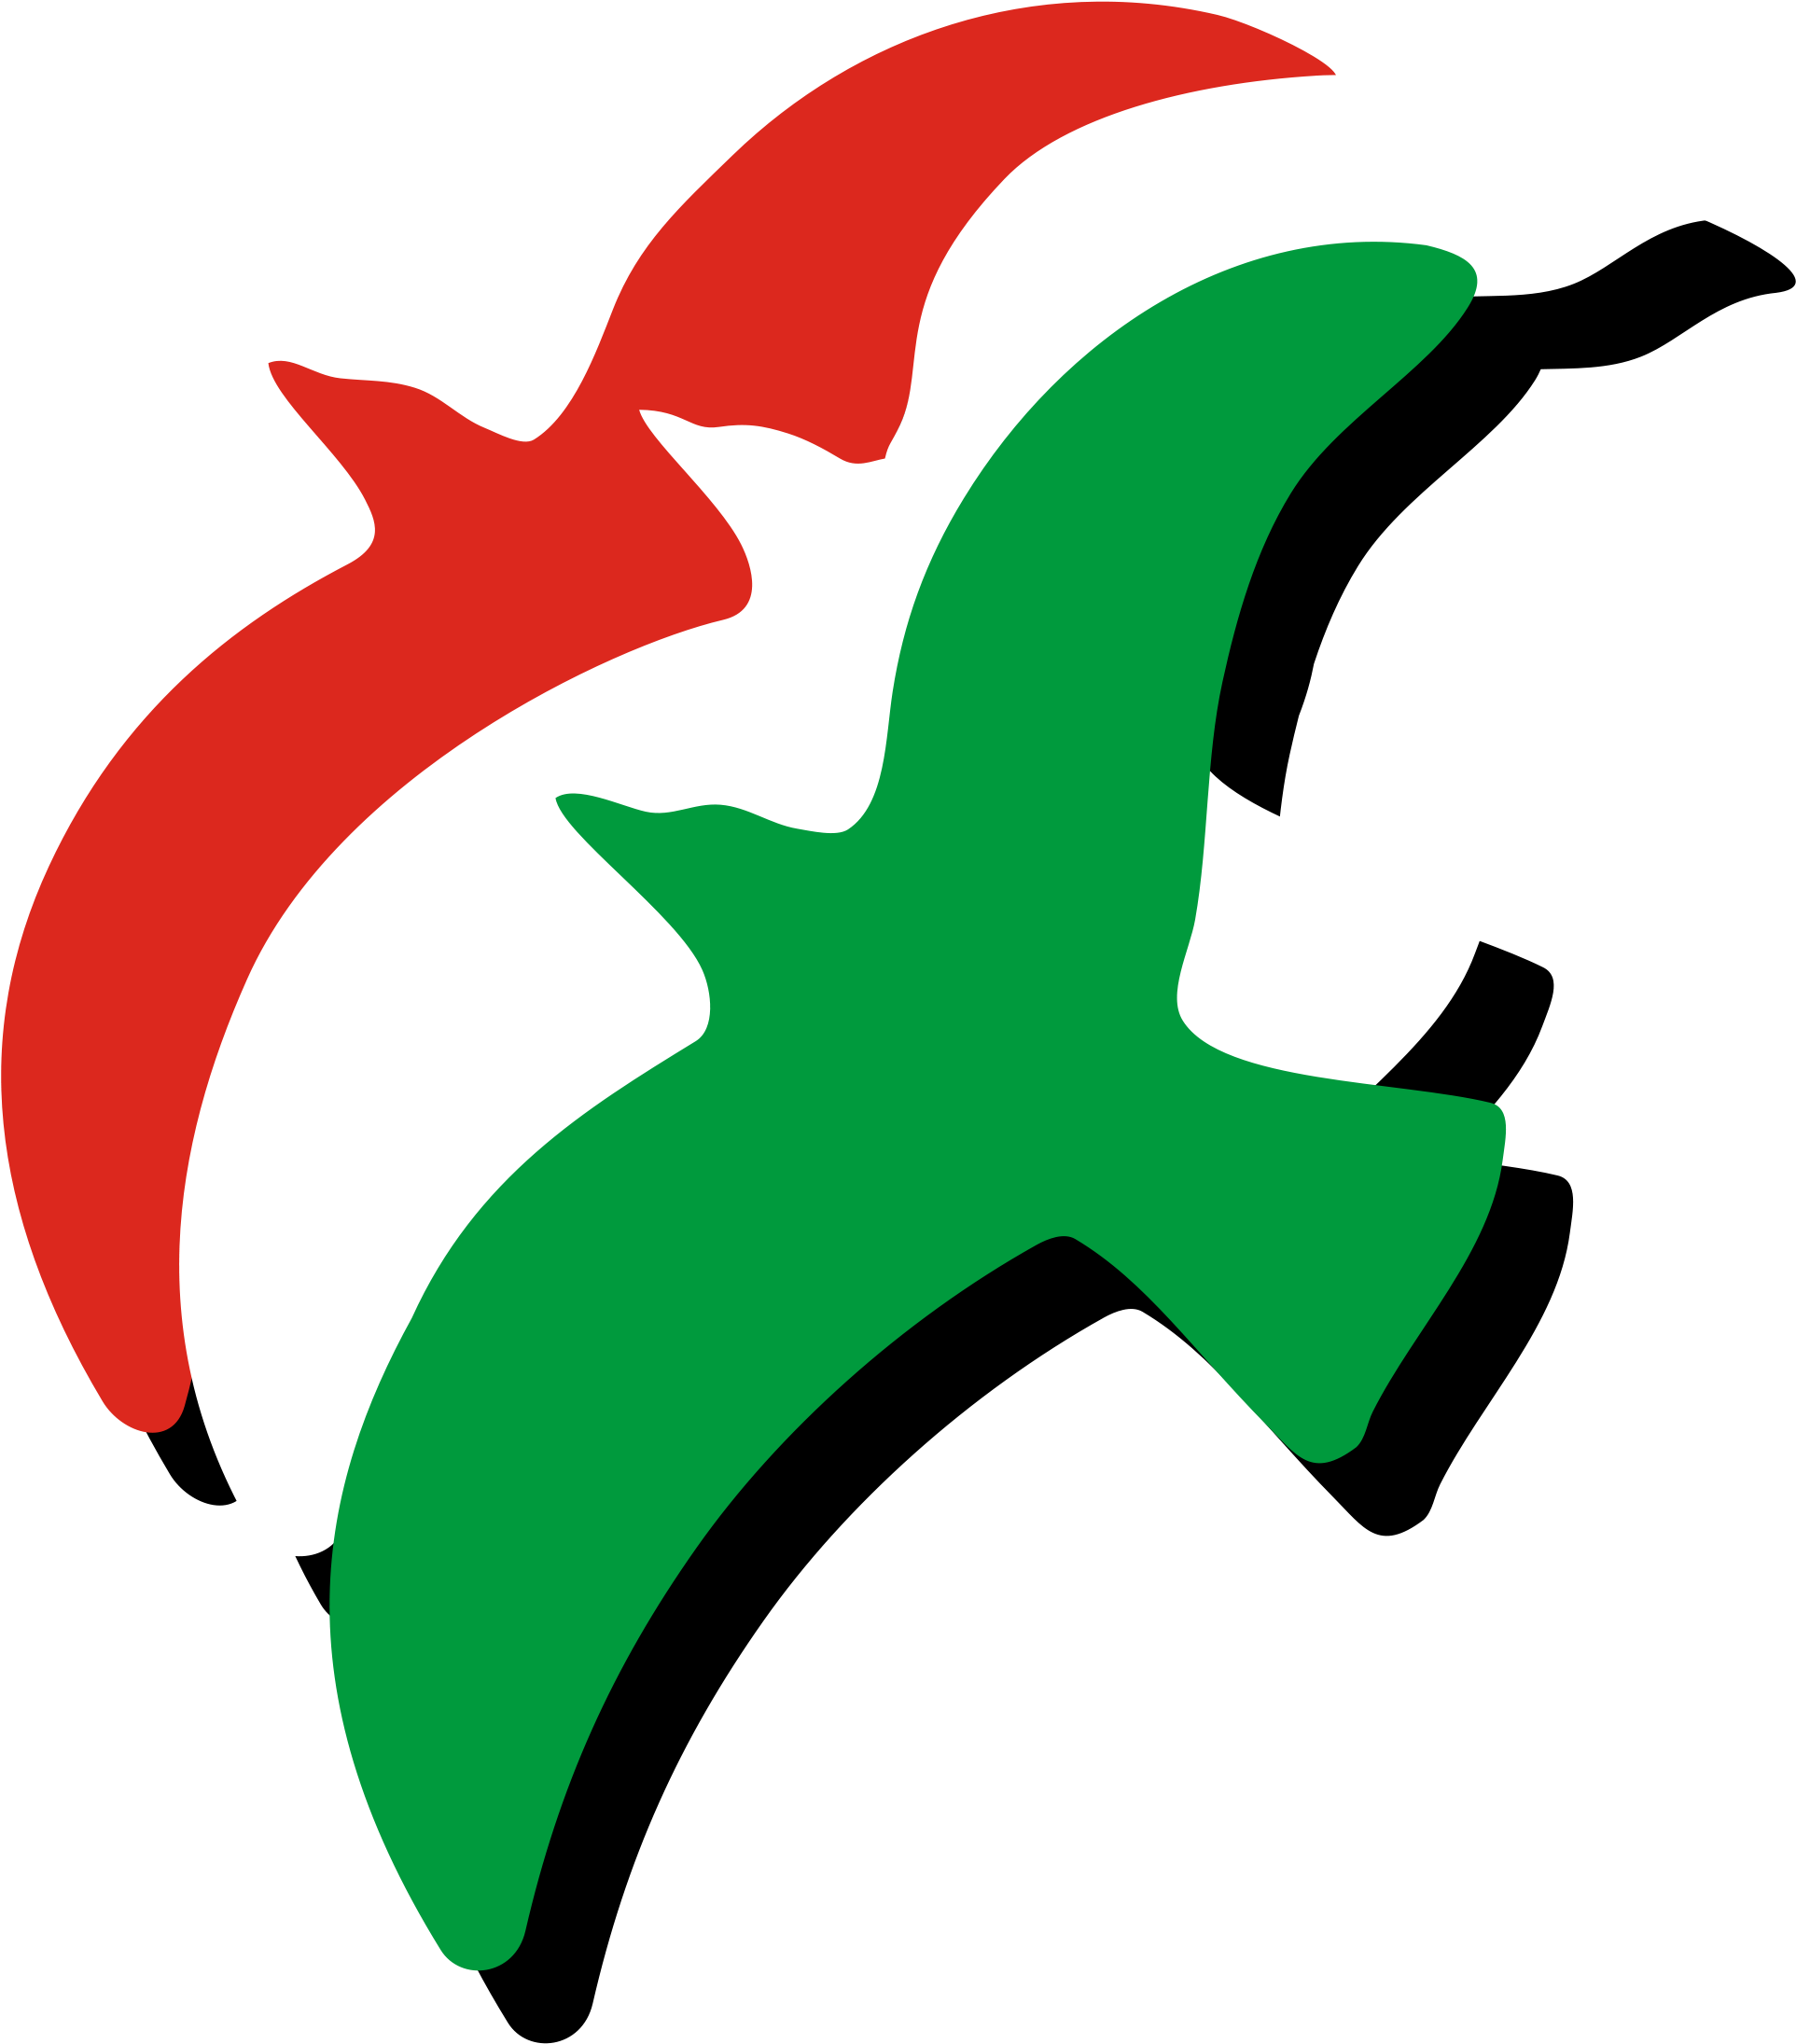 Insignia Hungary Political Party Szdsz - Logo For A Political Party (2000x2264)